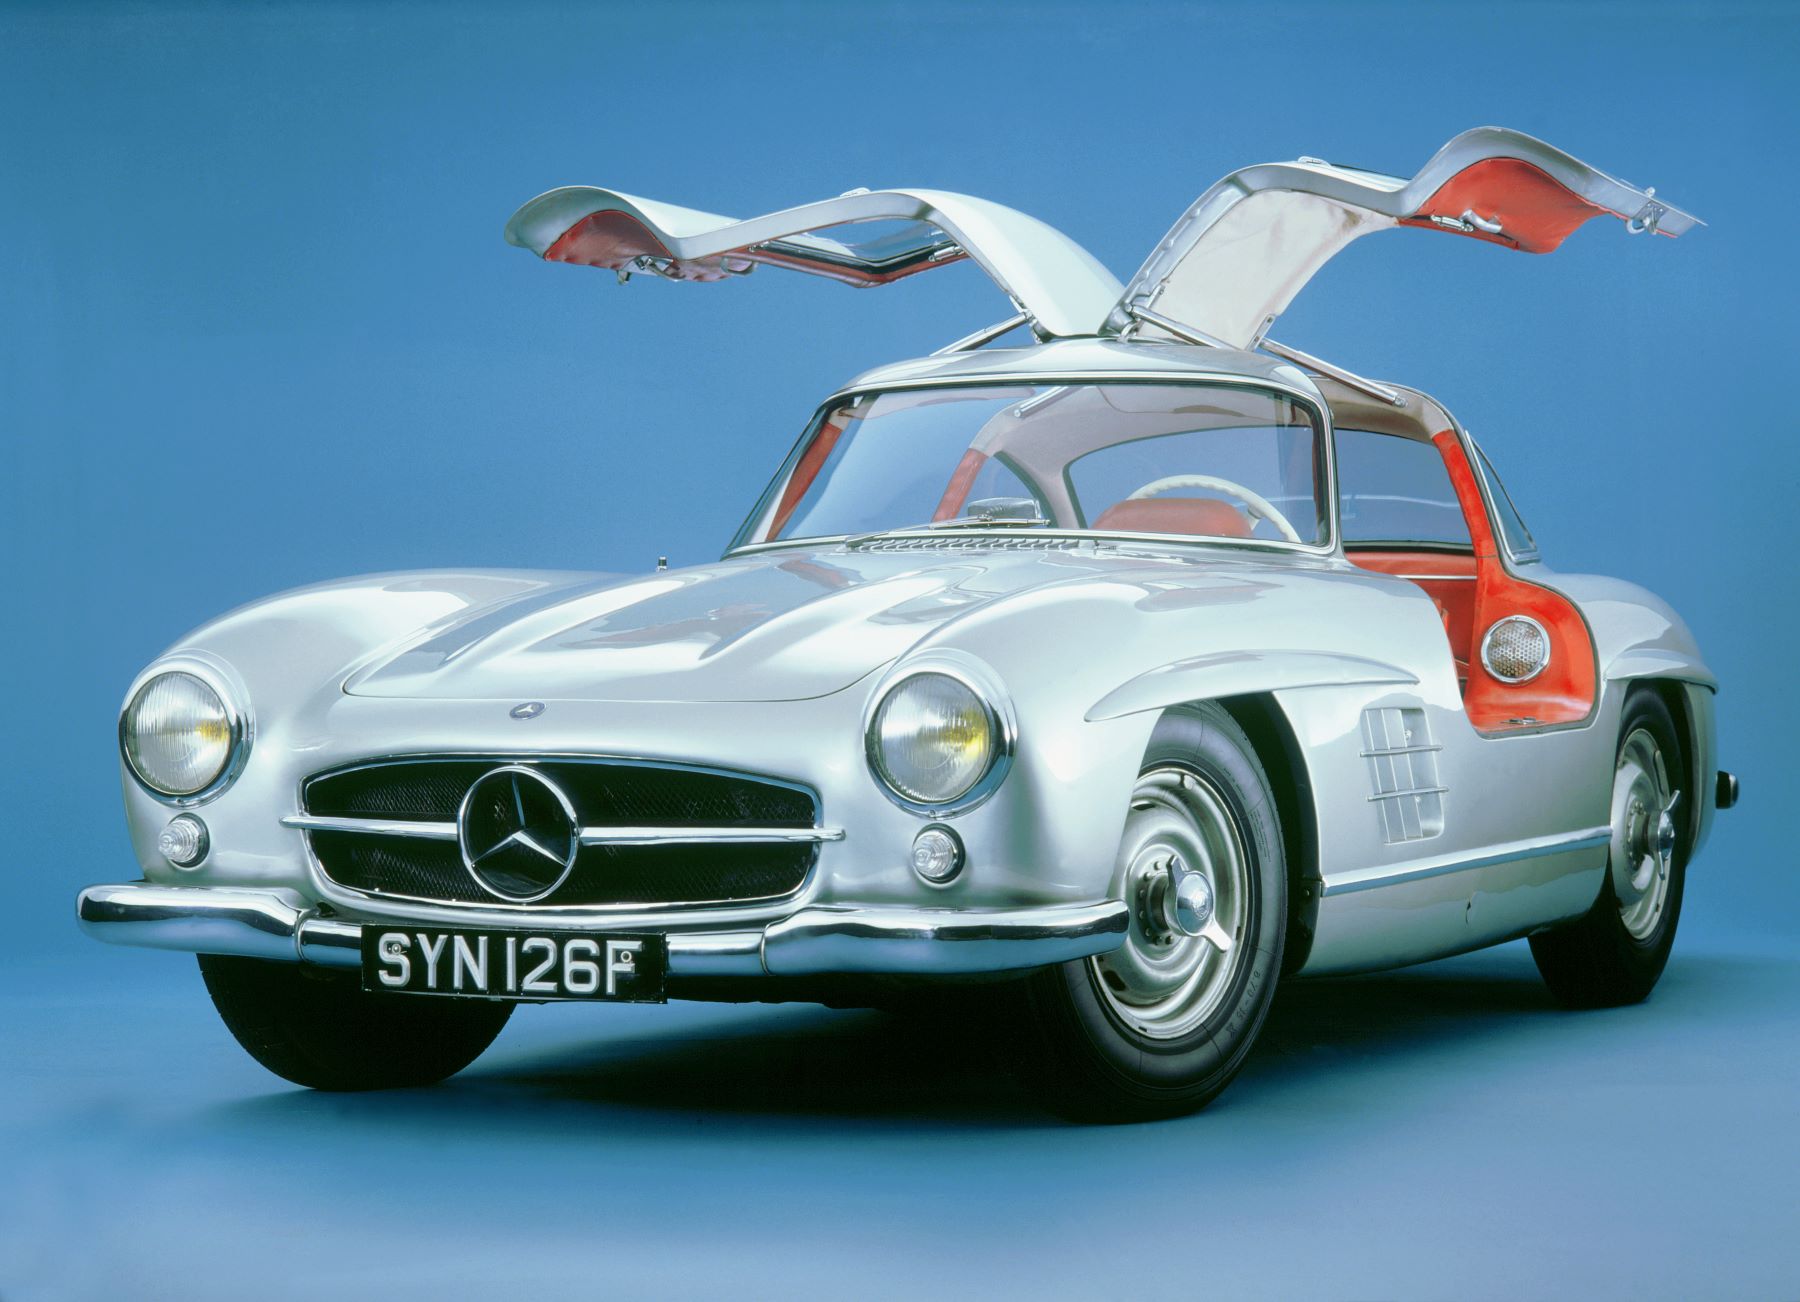 A 1957 Mercedes-Benz 300SL model with gull-wing doors